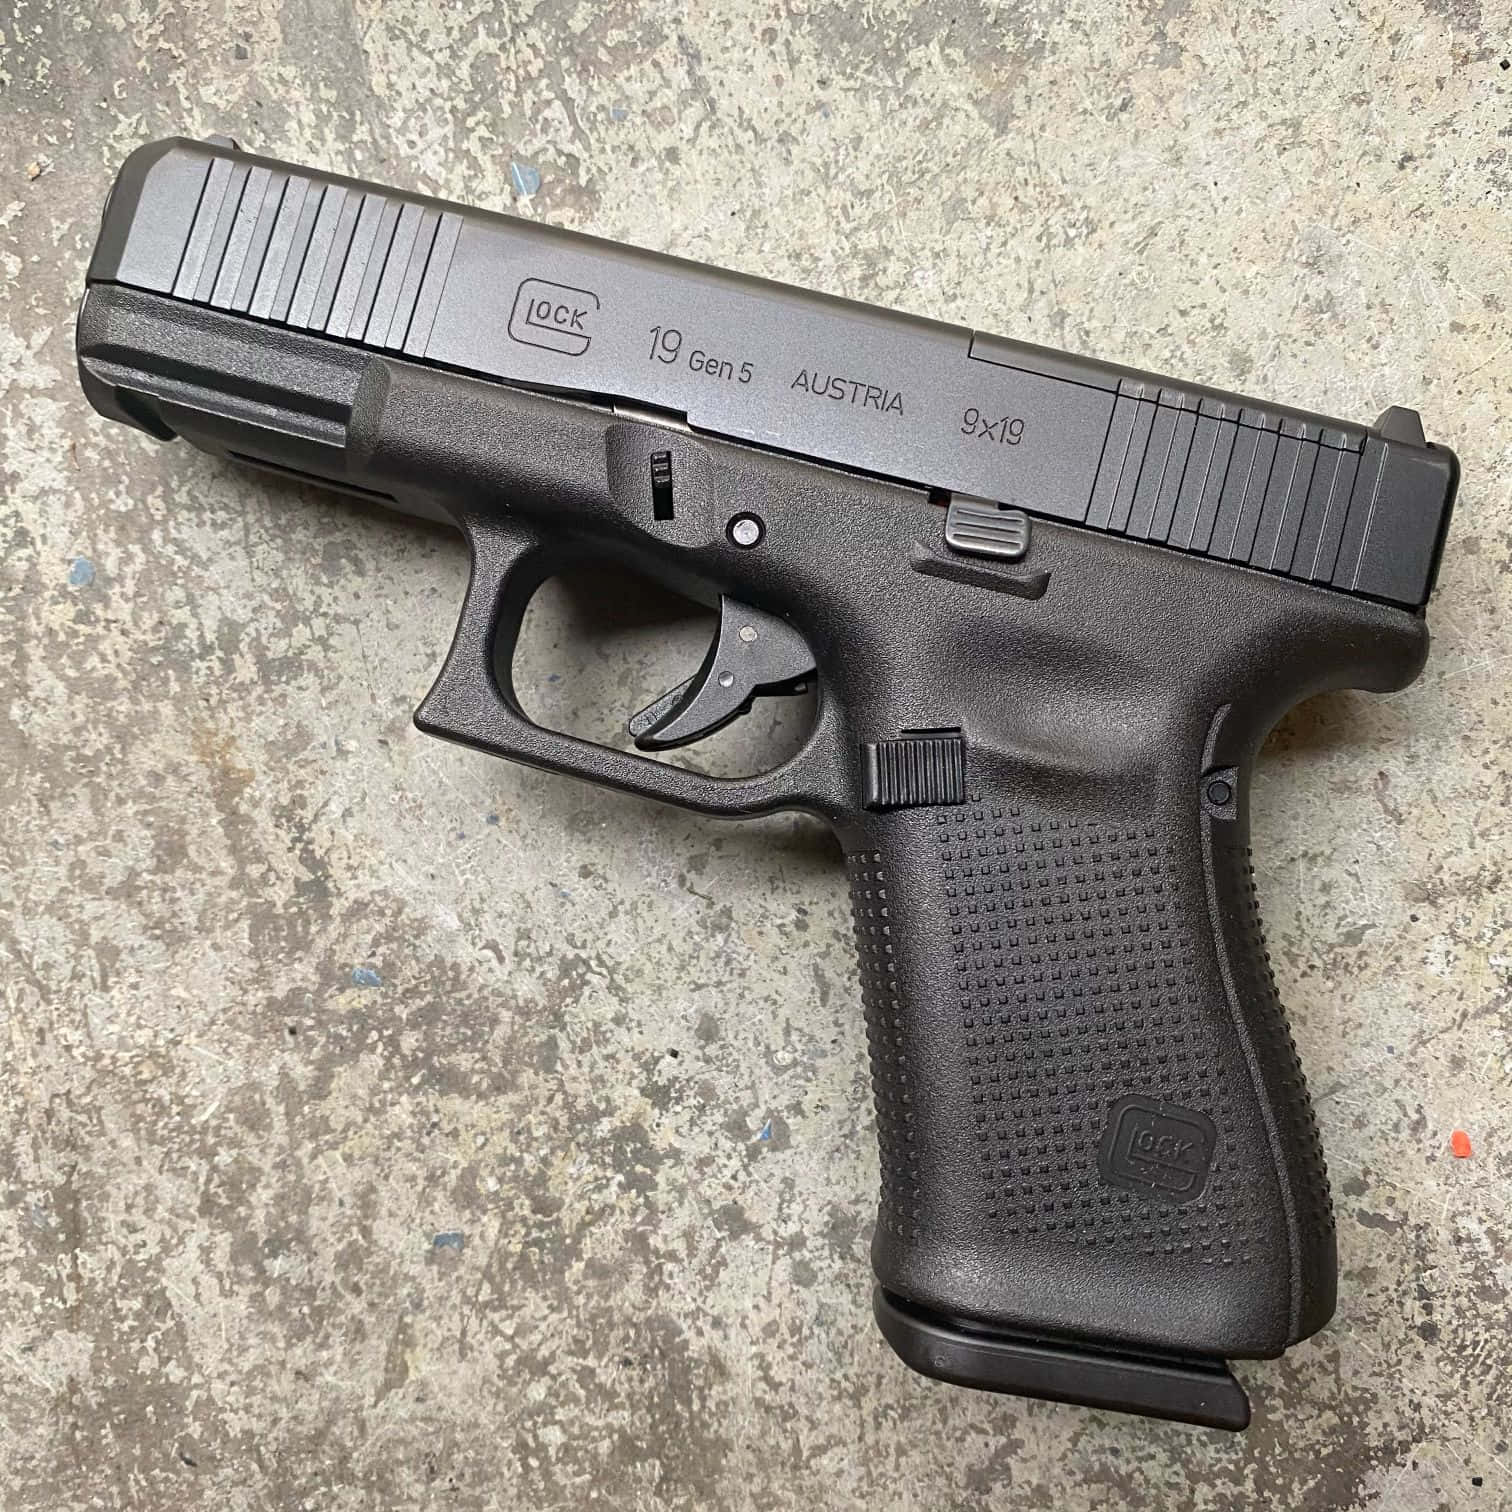 The Powerful Glock 19 Ready for Any Challenge